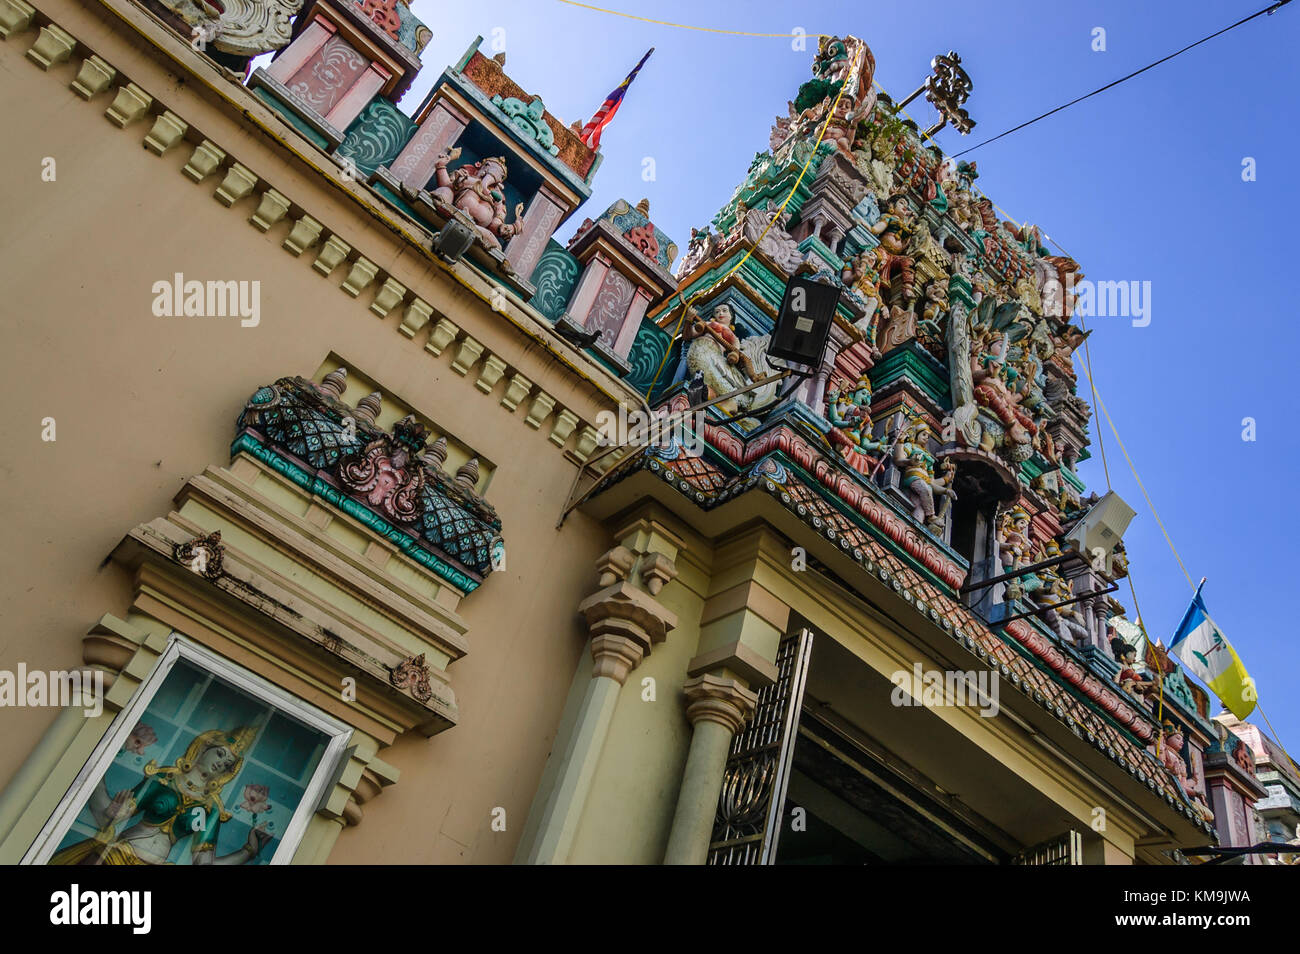 Penang, Malaysia - September 3, 2013: Oldest Hindu temple in Malaysia, Sri Mahamariamman Temple, Little India in historical George Town Stock Photo